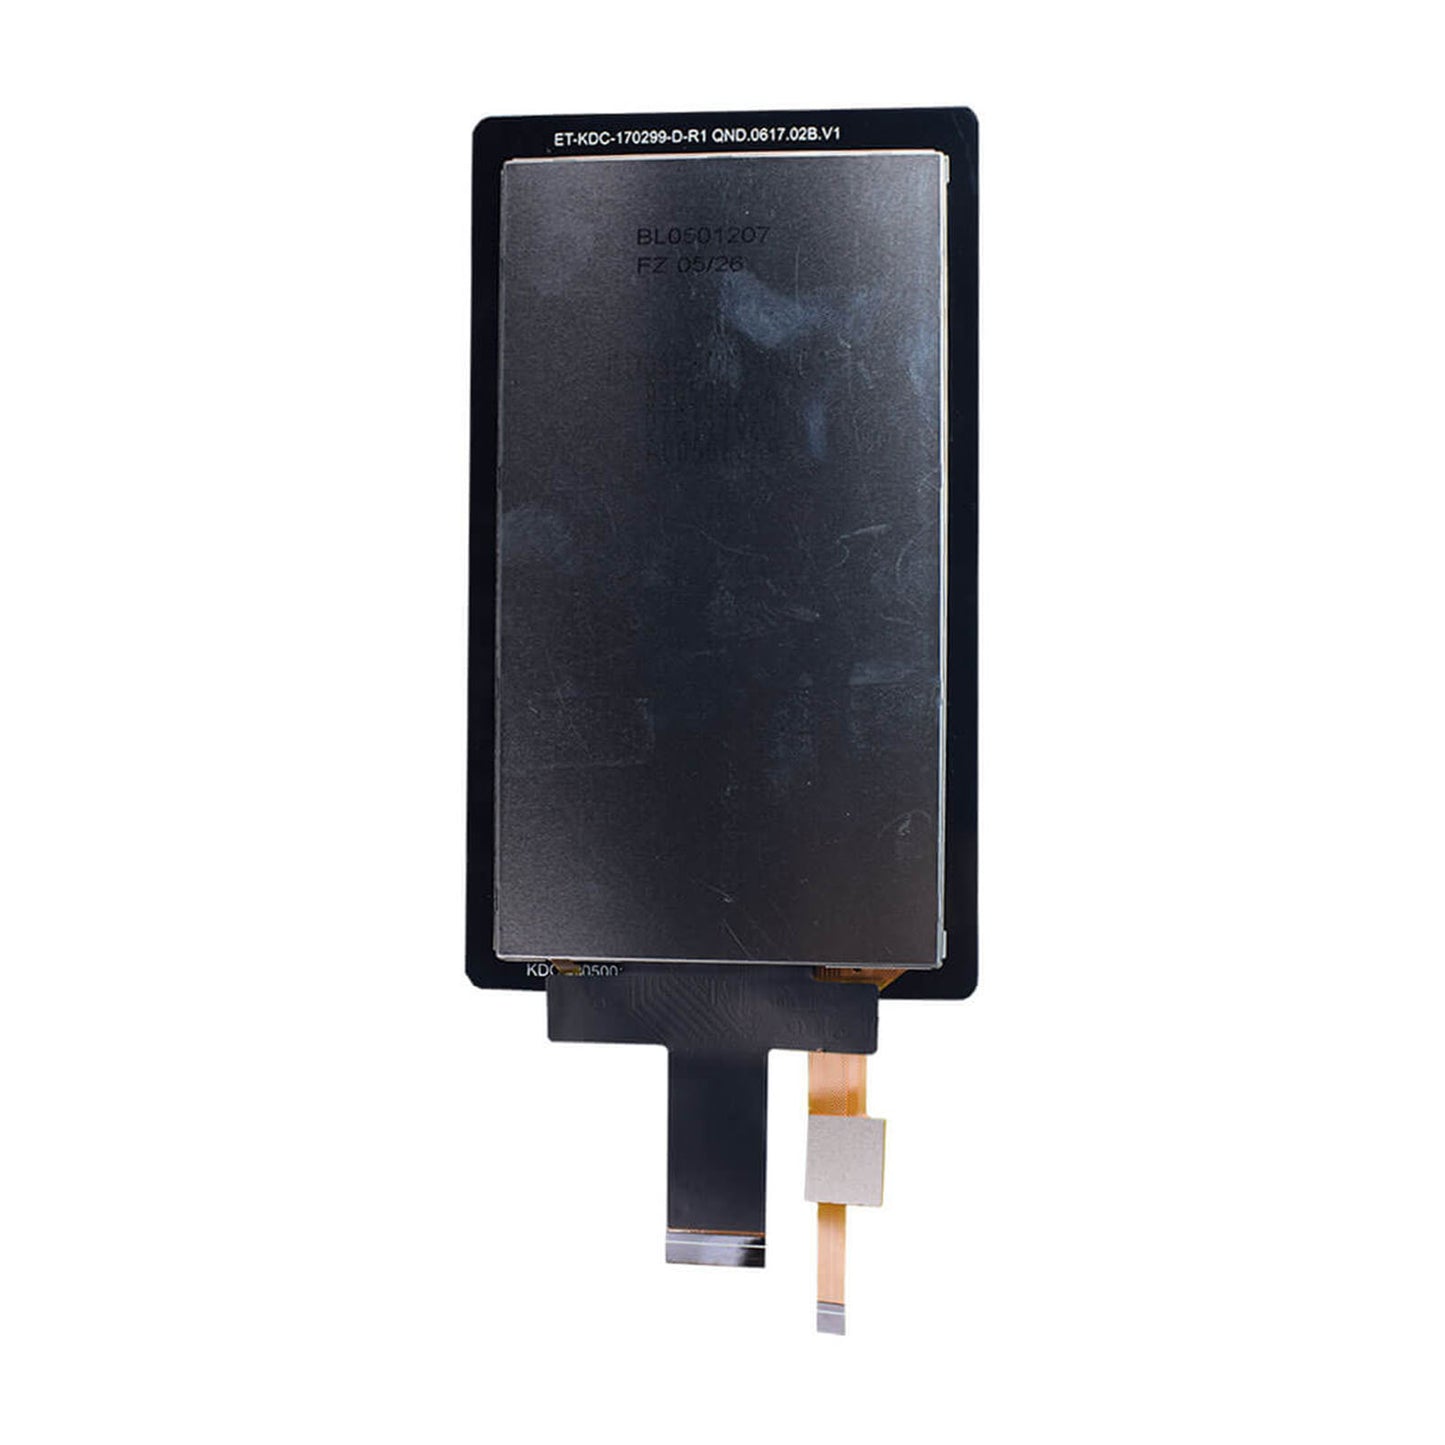 DisplayModule 5" IPS 720x1280 Display Panel with Capacitive Touch - MIPI